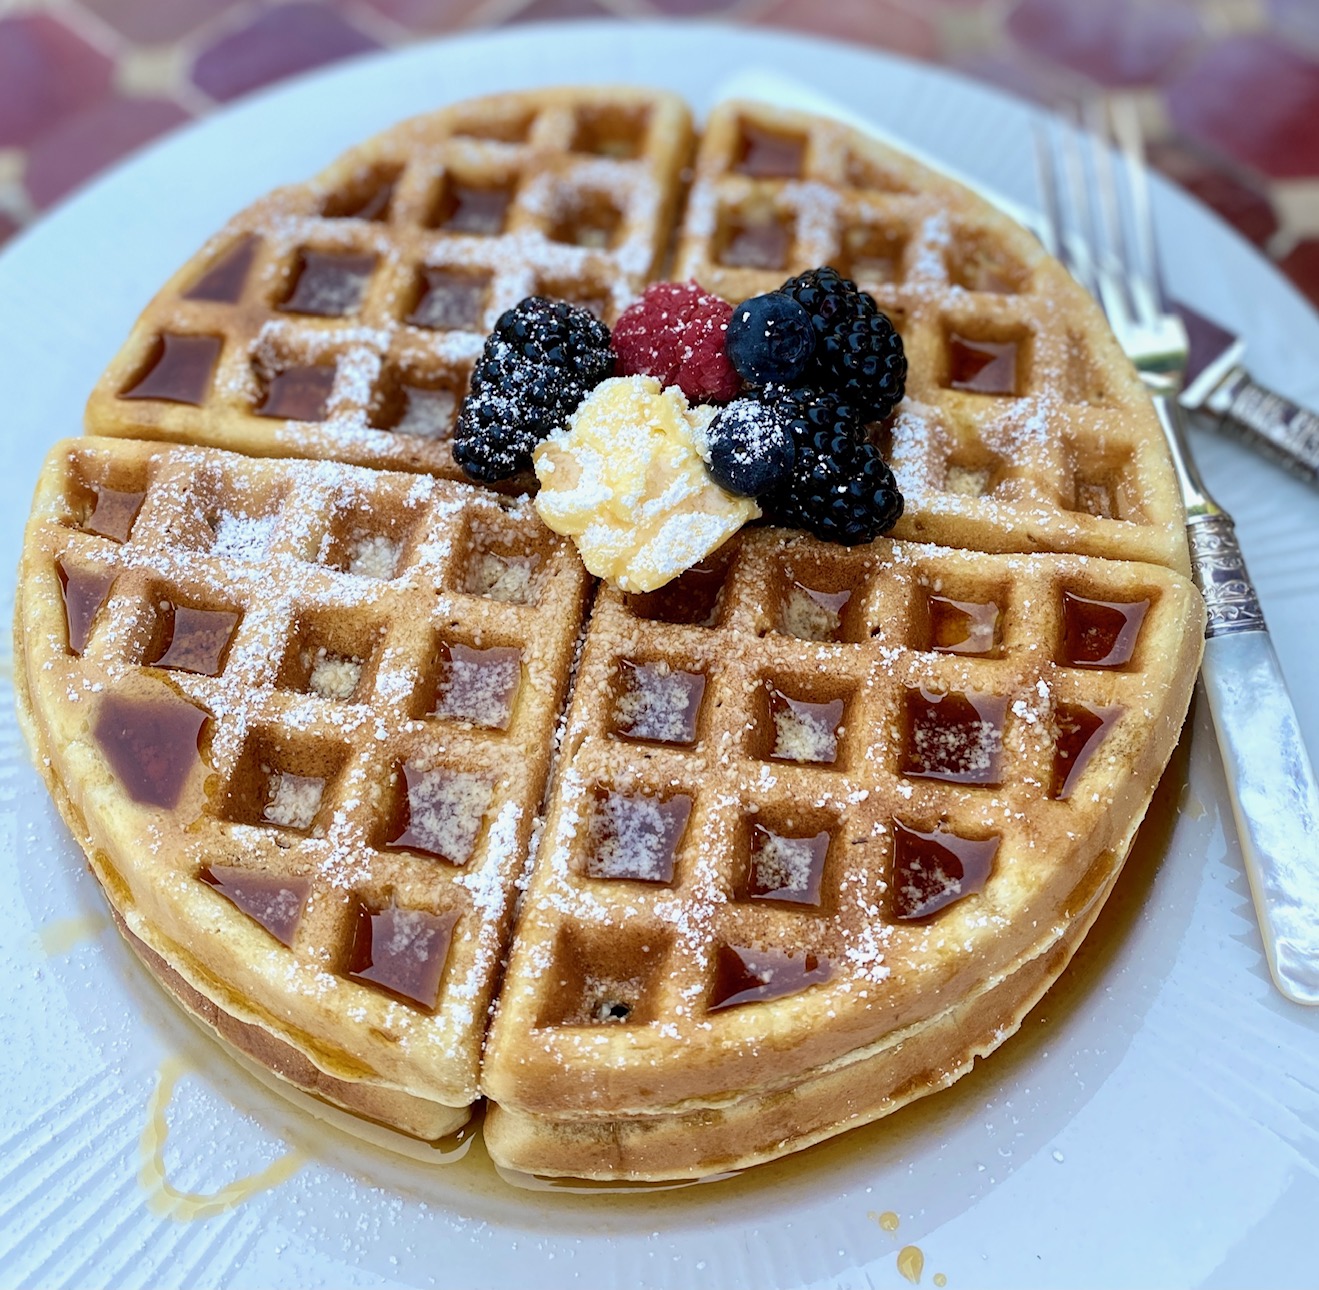 https://theartoffoodandwine.com/wp-content/uploads/2021/09/waffle-on-plate-on-red-table.jpg